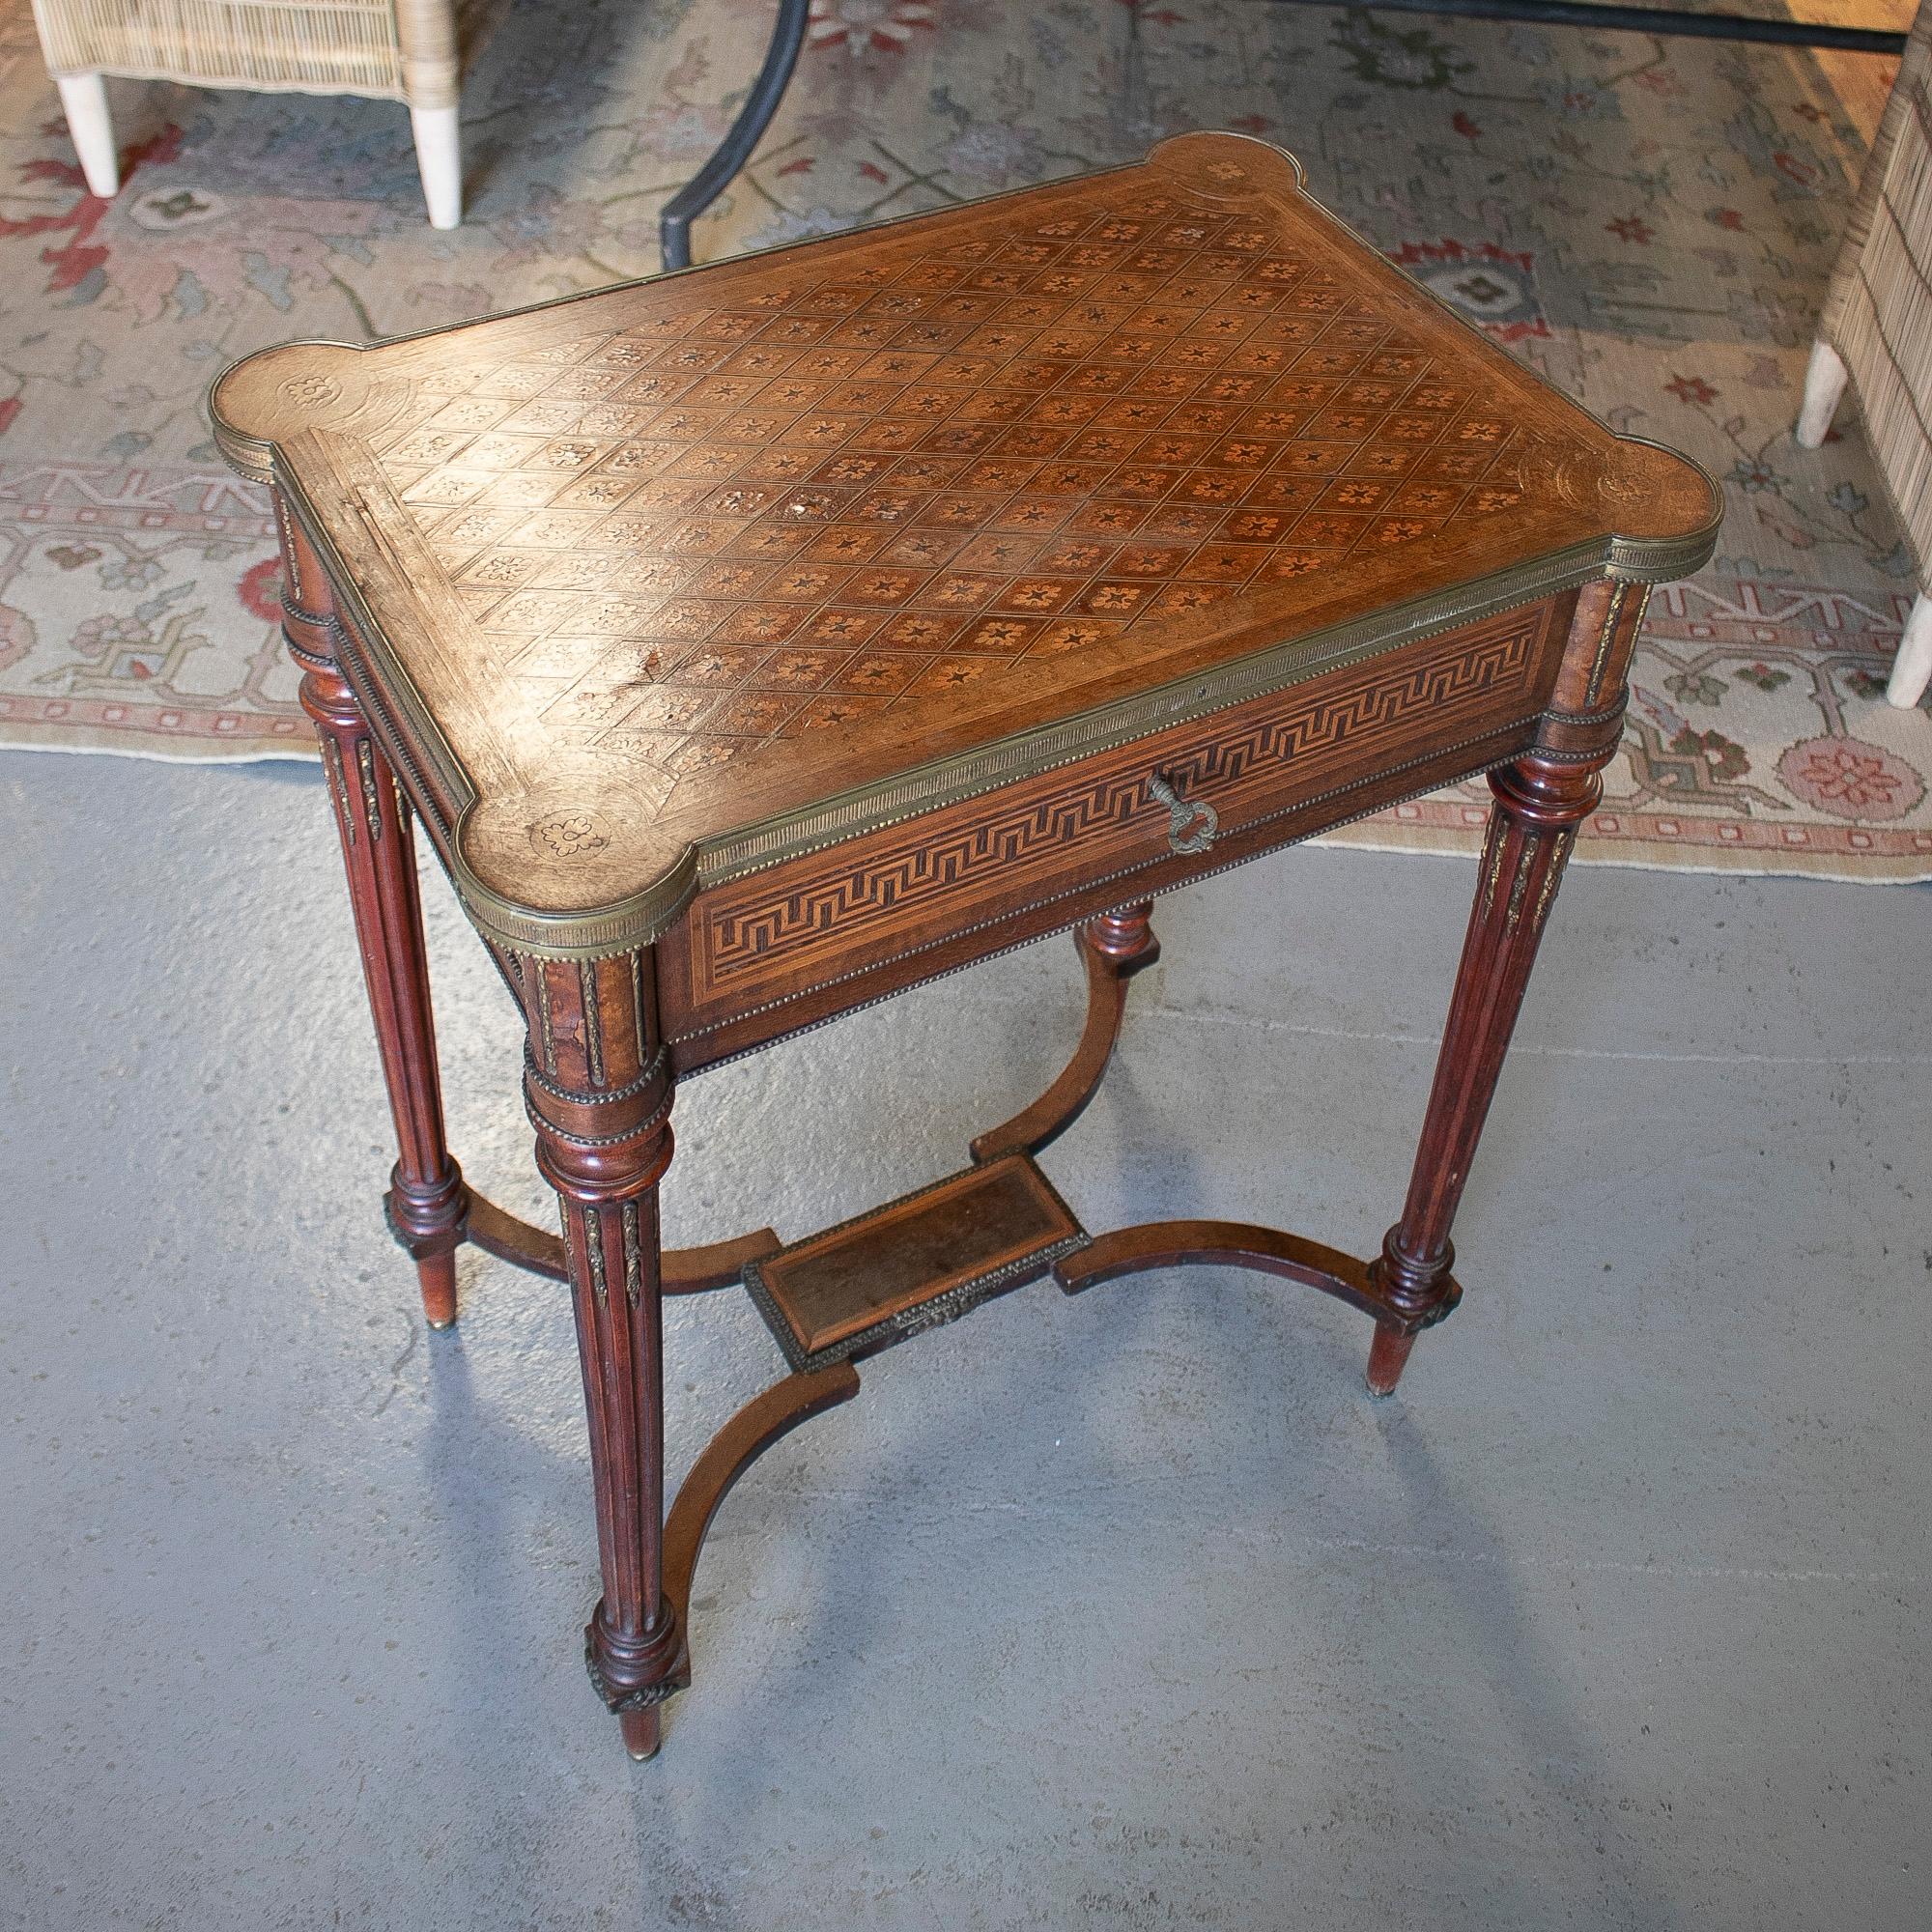 Antique 19th century French marquetry and bronze dressing table.